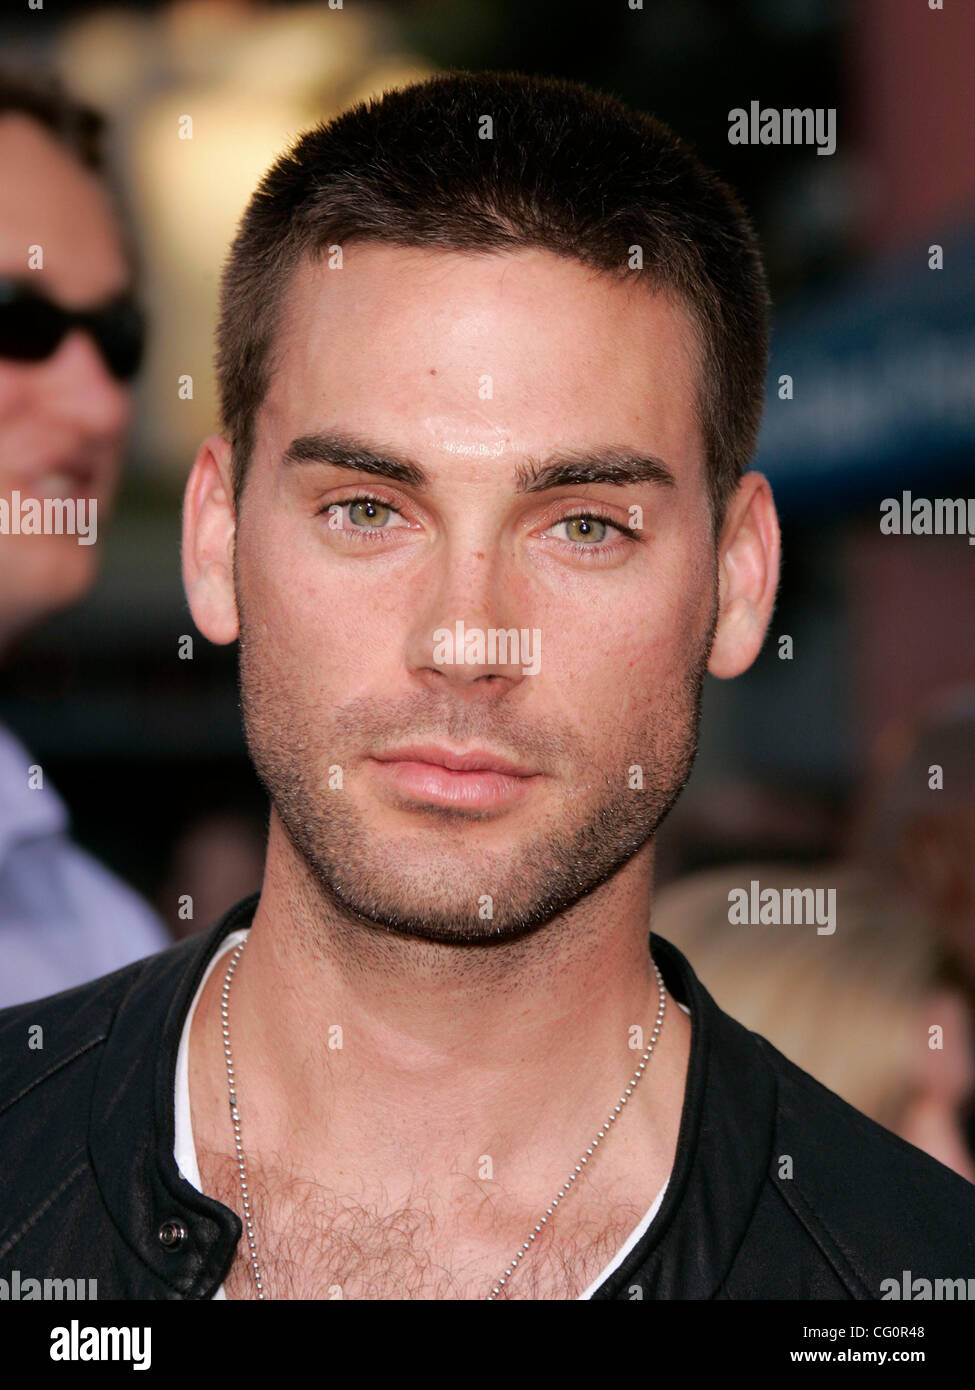 Jul 12,2007; Hollywood, California, USA; Actor DREW FULLER at the 'I Now Pronounce You Chuck & Larry' World Premiere held at the Gibson Ampitheatre. Mandatory Credit: Photo by Lisa O'Connor/ZUMA Press. (©) Copyright 2007 by Lisa O'Connor Stock Photo